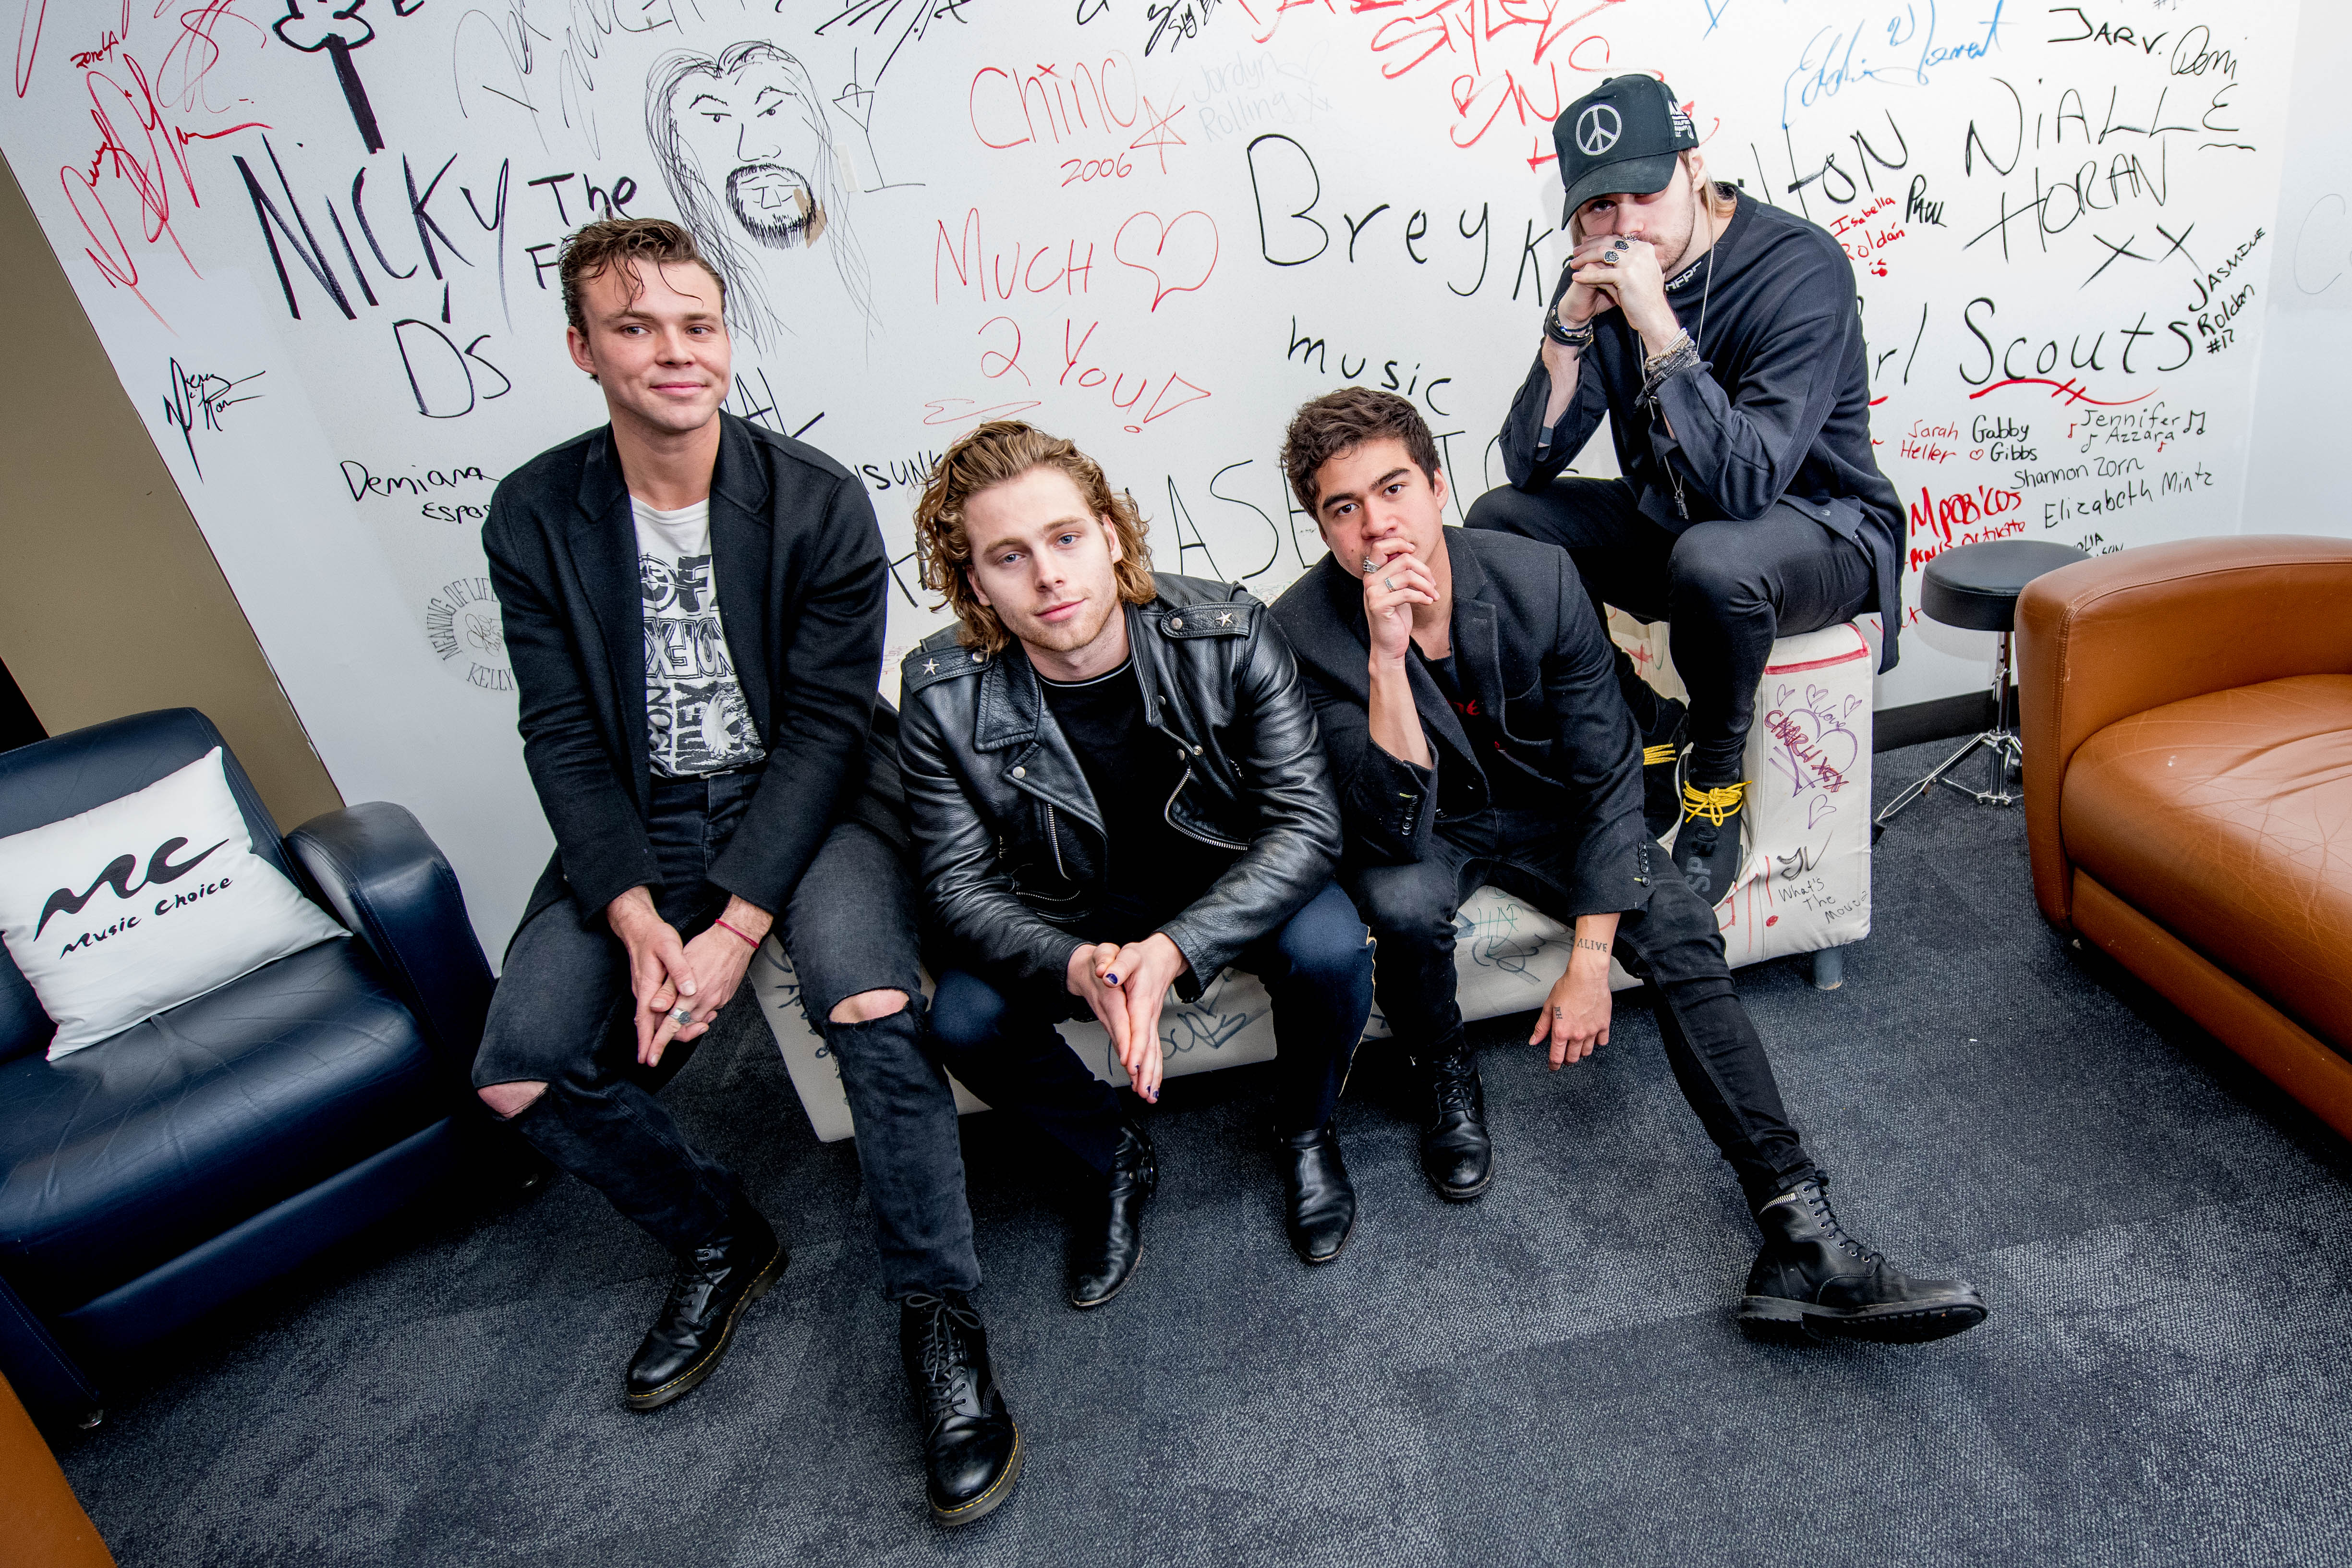 5 Seconds Of Summer Makes History With Third Album Youngblood